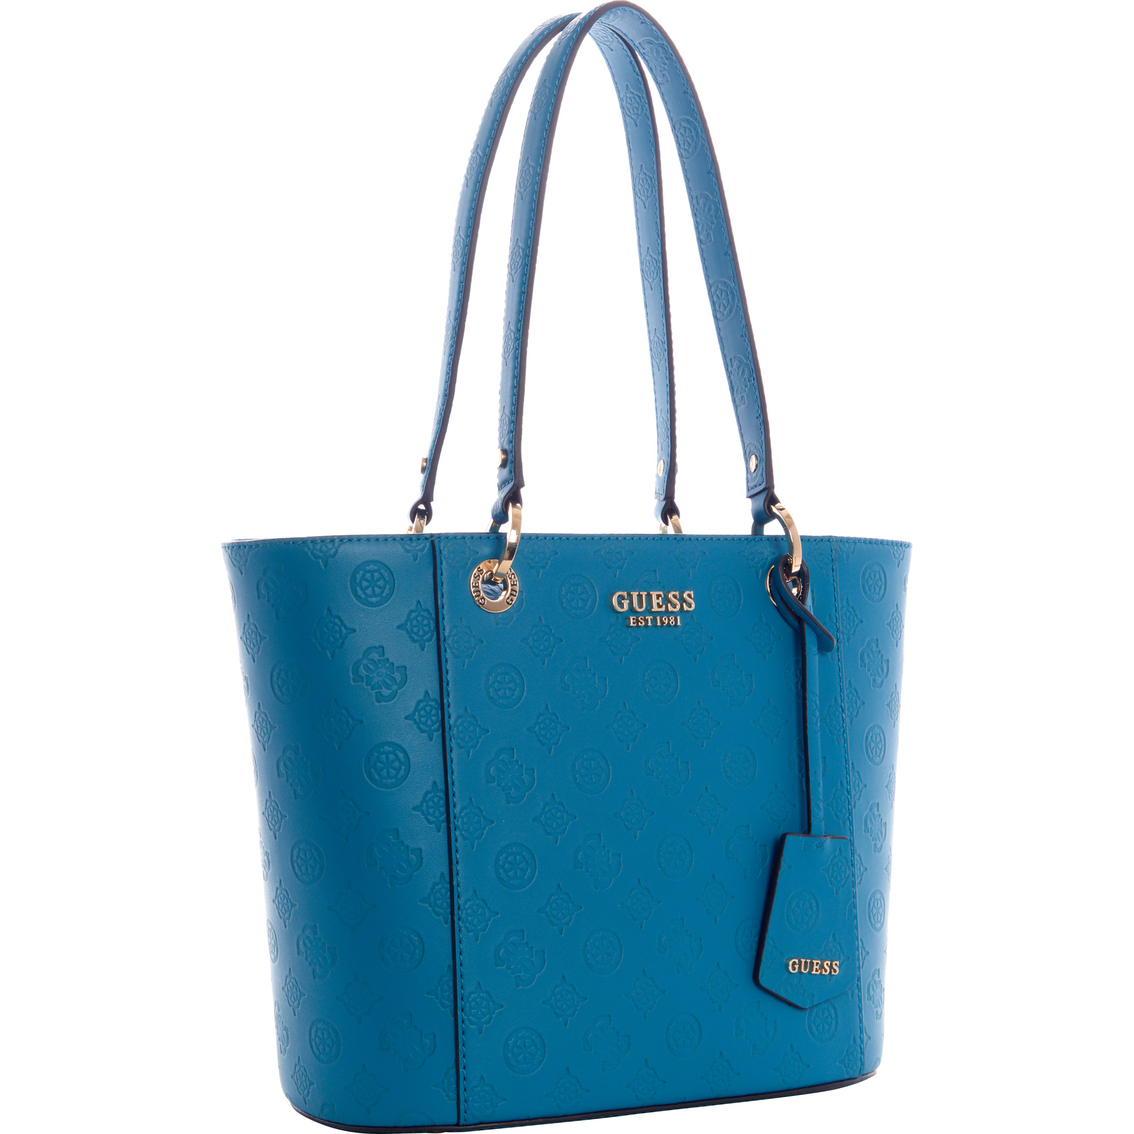 Guess Noelle Tote - Image 2 of 3